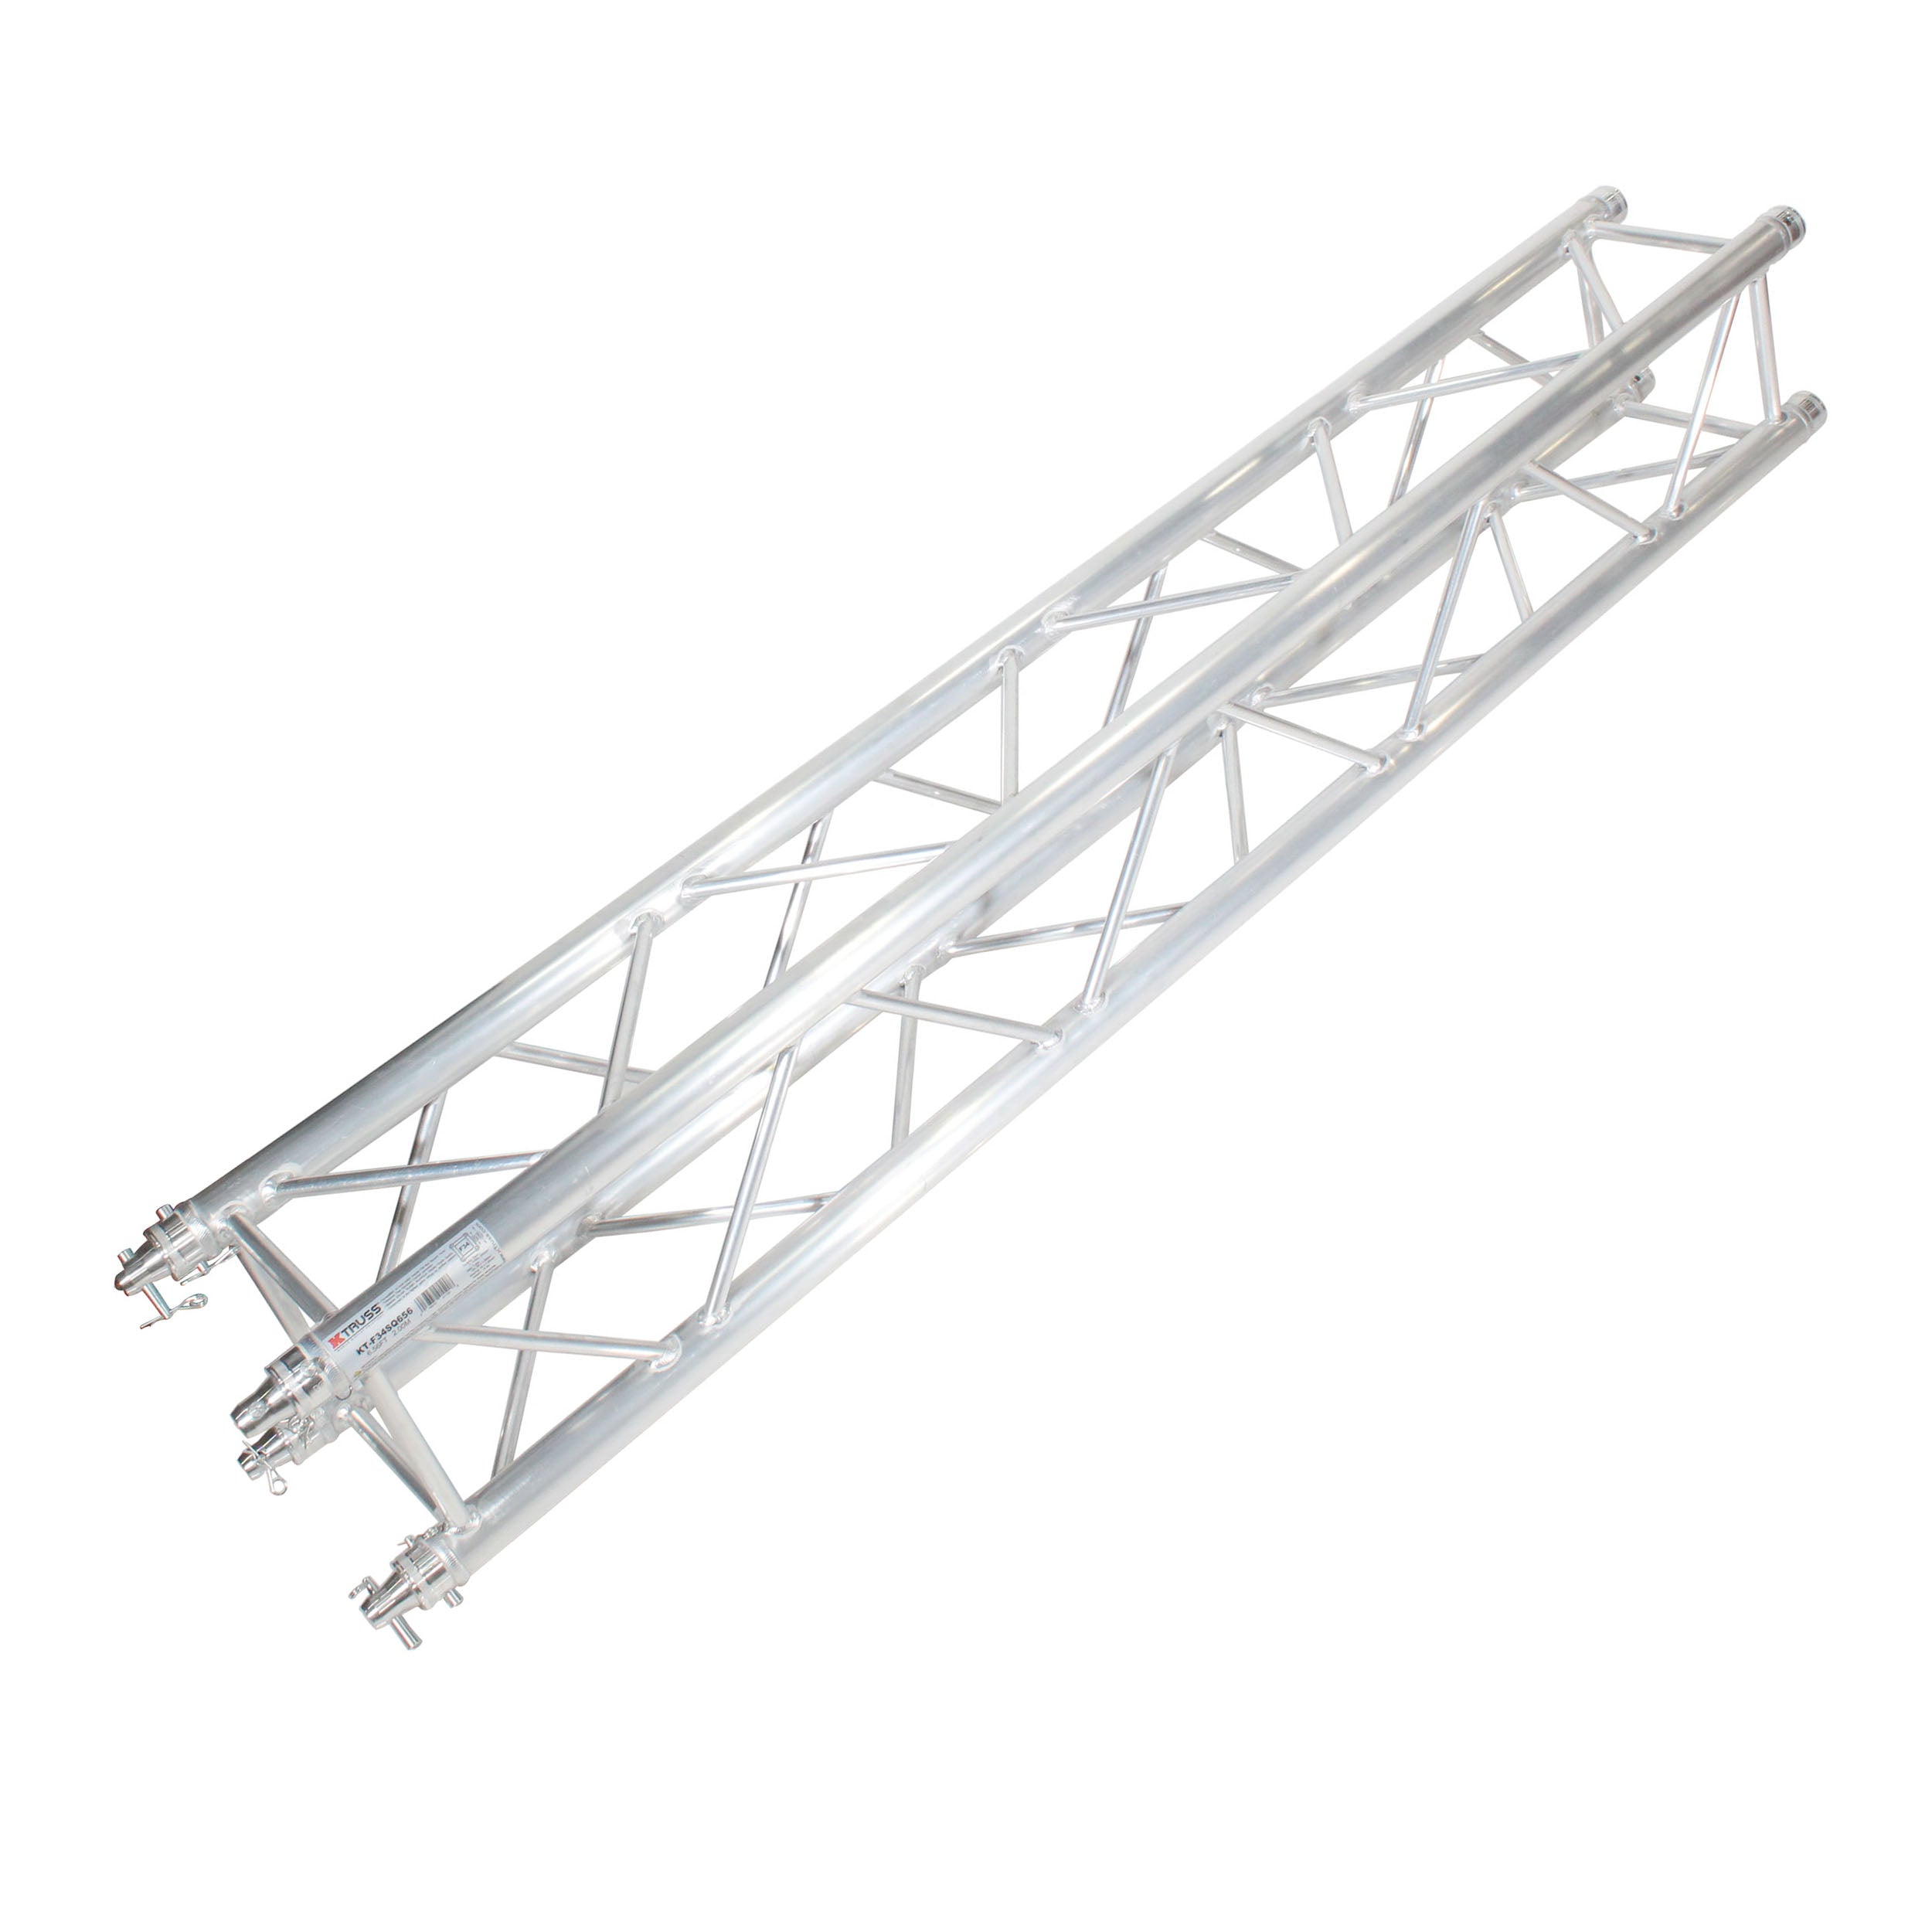 ProX K-Truss 6.56 Lightweight Square Truss Totem Full Package Includes White Scrim, Top Plate and Base Plate KT-SQ656TOTEMTCX2